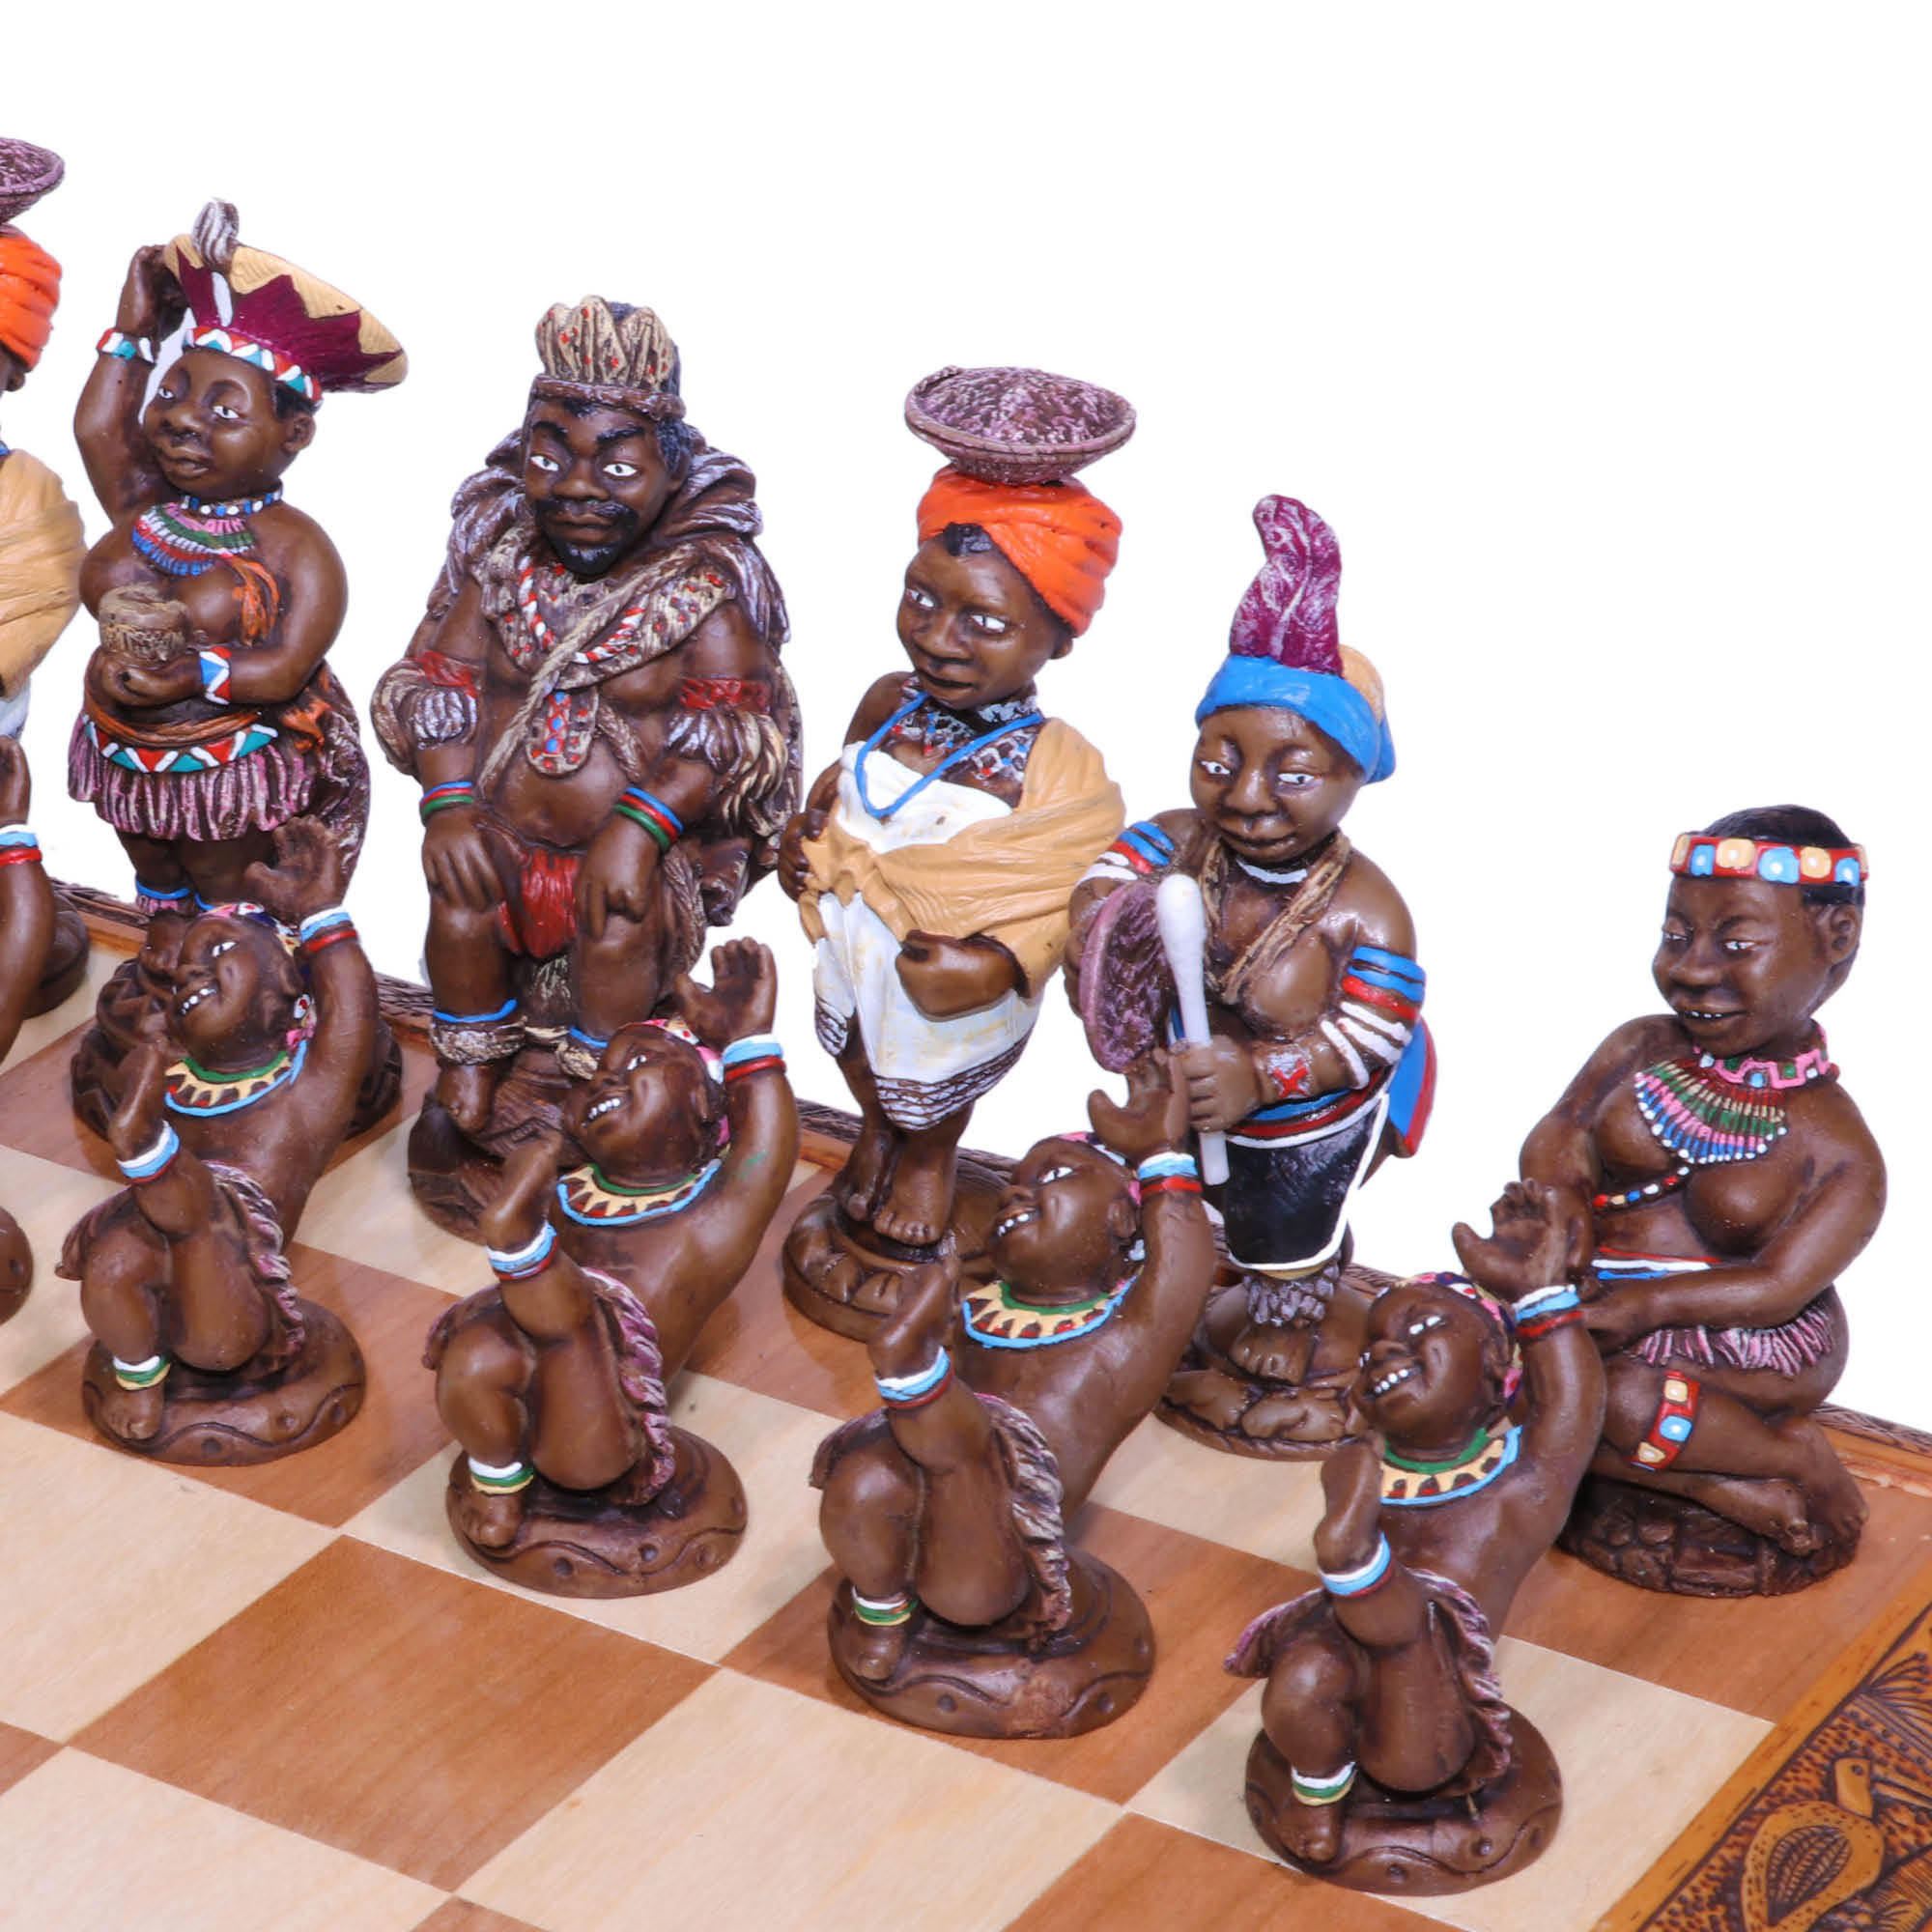 African General Tribal Chess Set